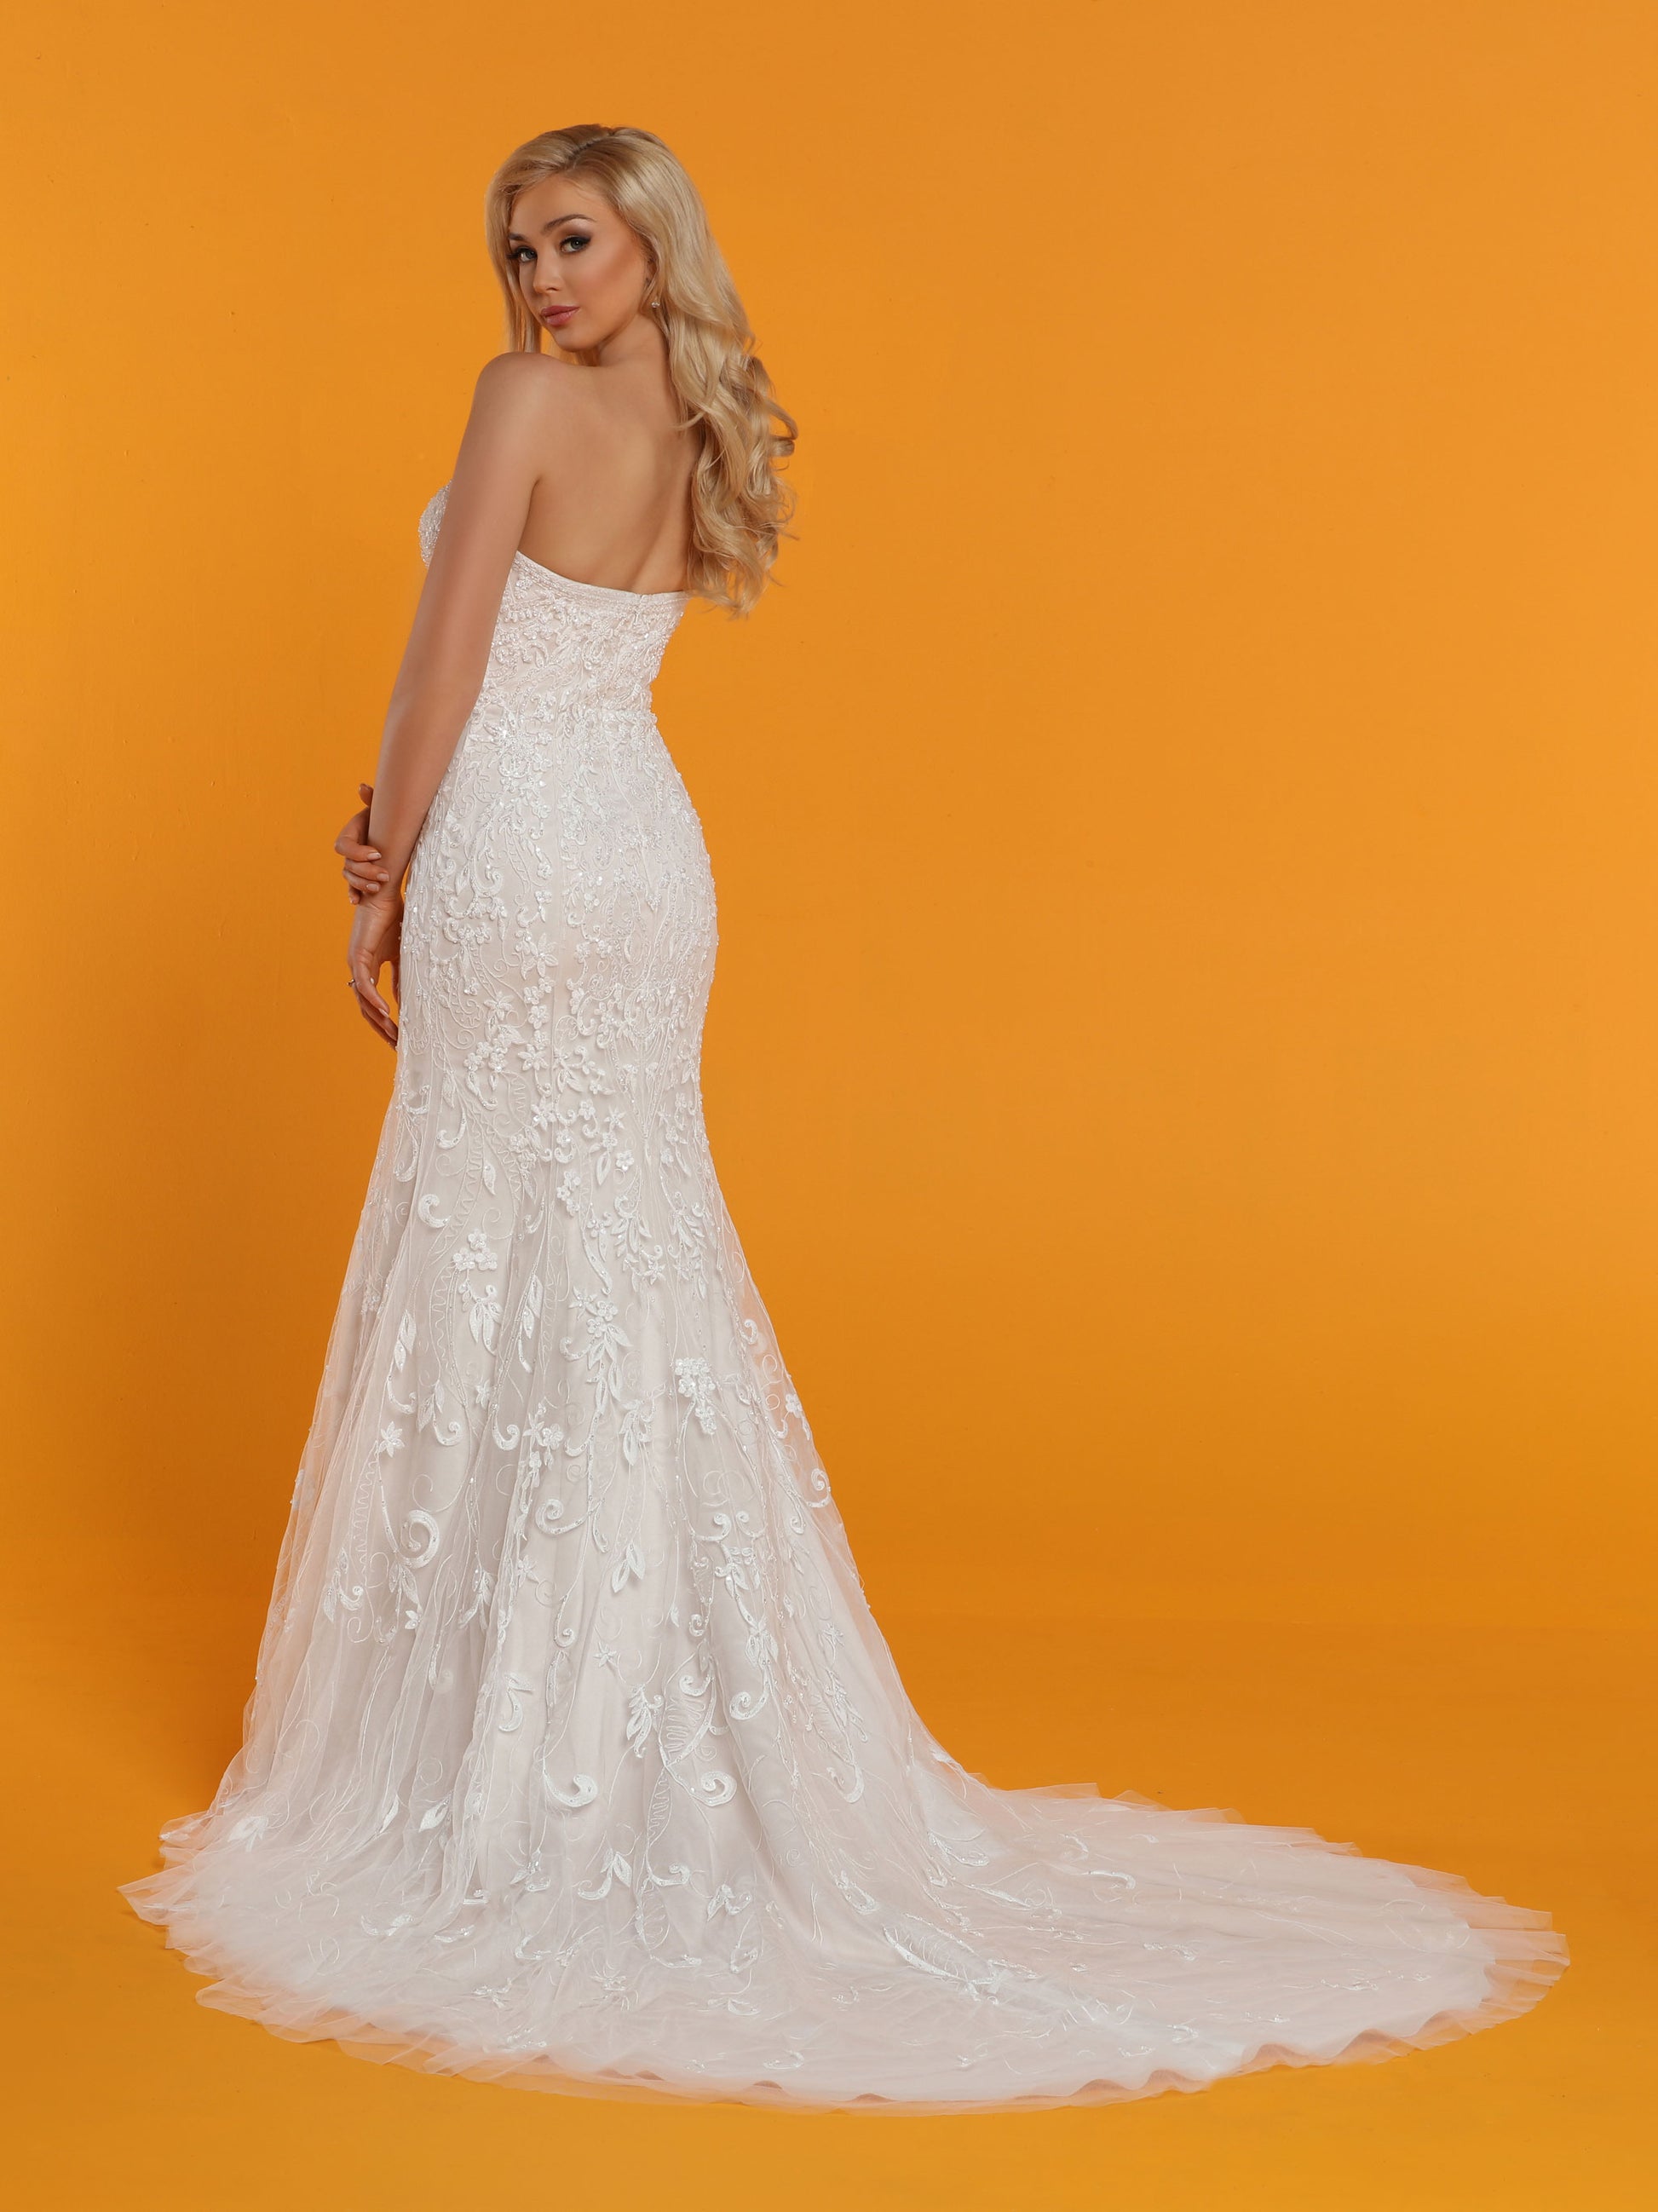 Davinci Bridal 50518 is a Fitted Fit & Flare Mermaid Wedding Dress. Detailed Embellishments & Lace along the Bodice & Sweetheart neckline, cascading into the skirt of the gown & Train in the back.  Available for 1-2 Week Delivery!!!  Available Sizes: 2,4,6,8,10,12,14,16,18,20  Available Colors: Ivory/Sand, Ivory/Ivory